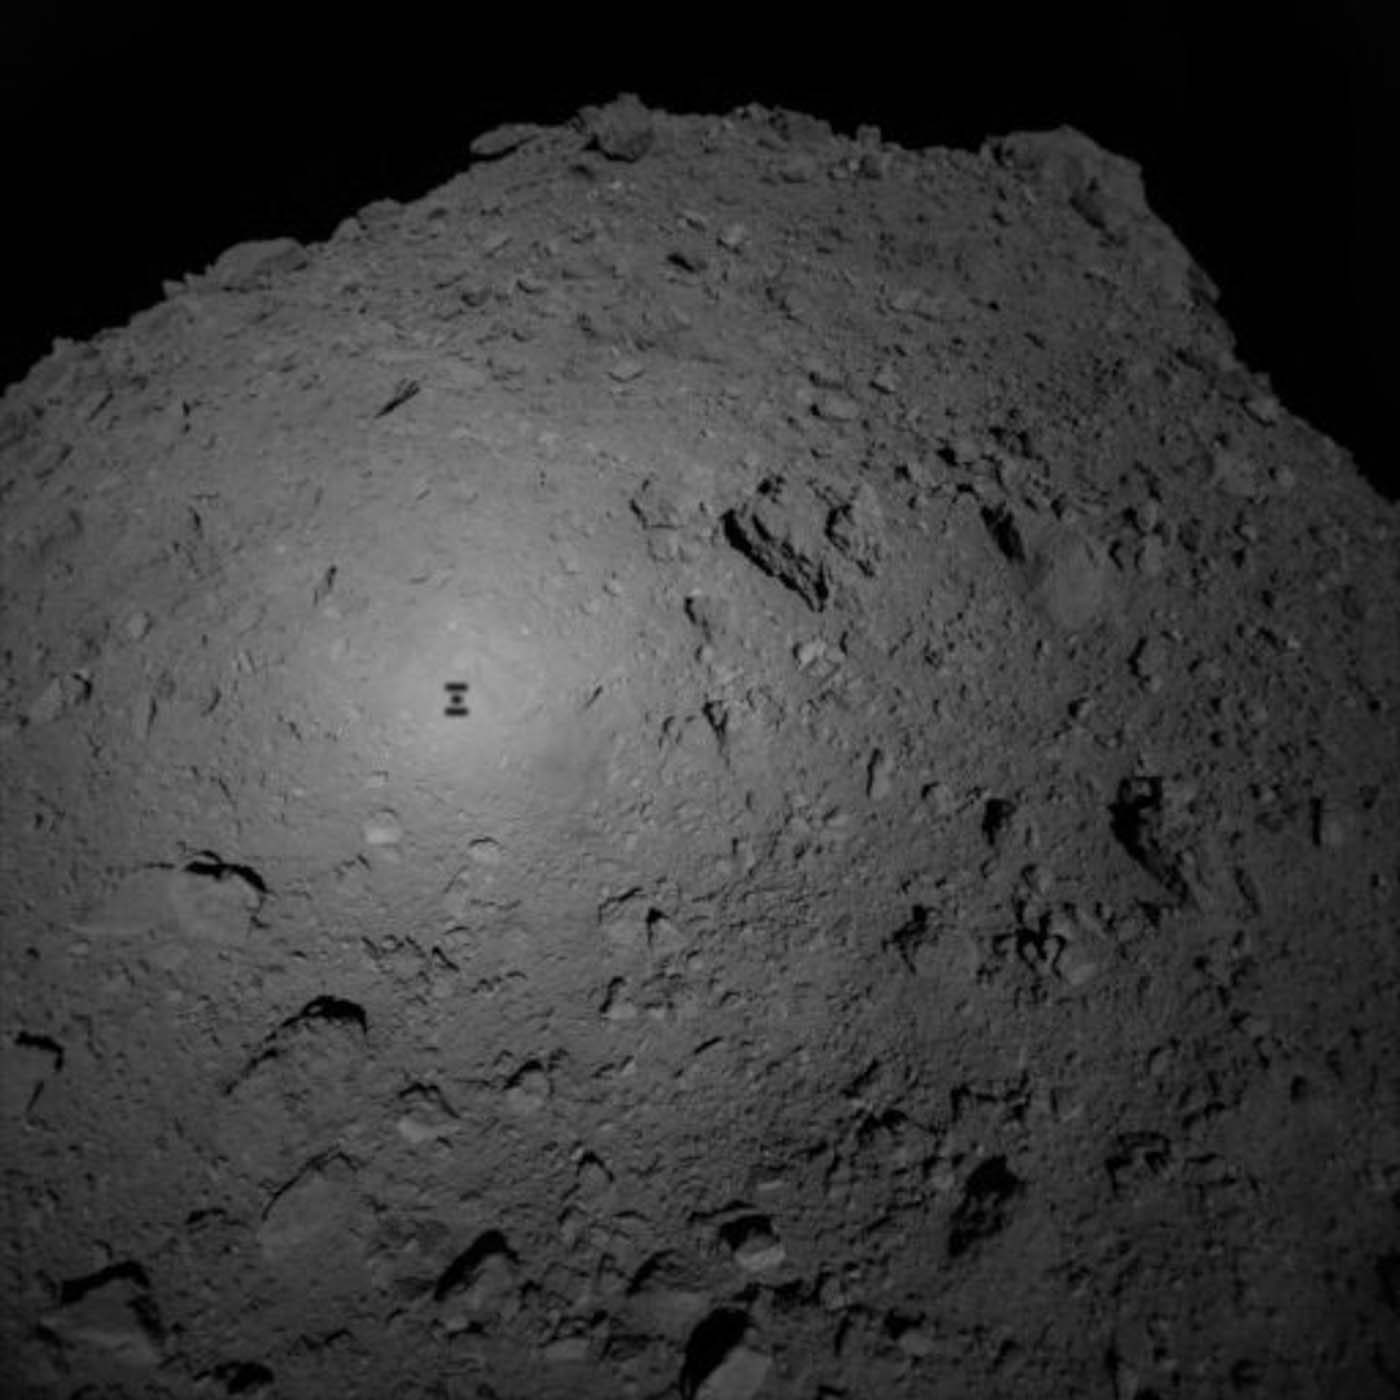 Touchdown! Japan space probe lands new robot on asteroid